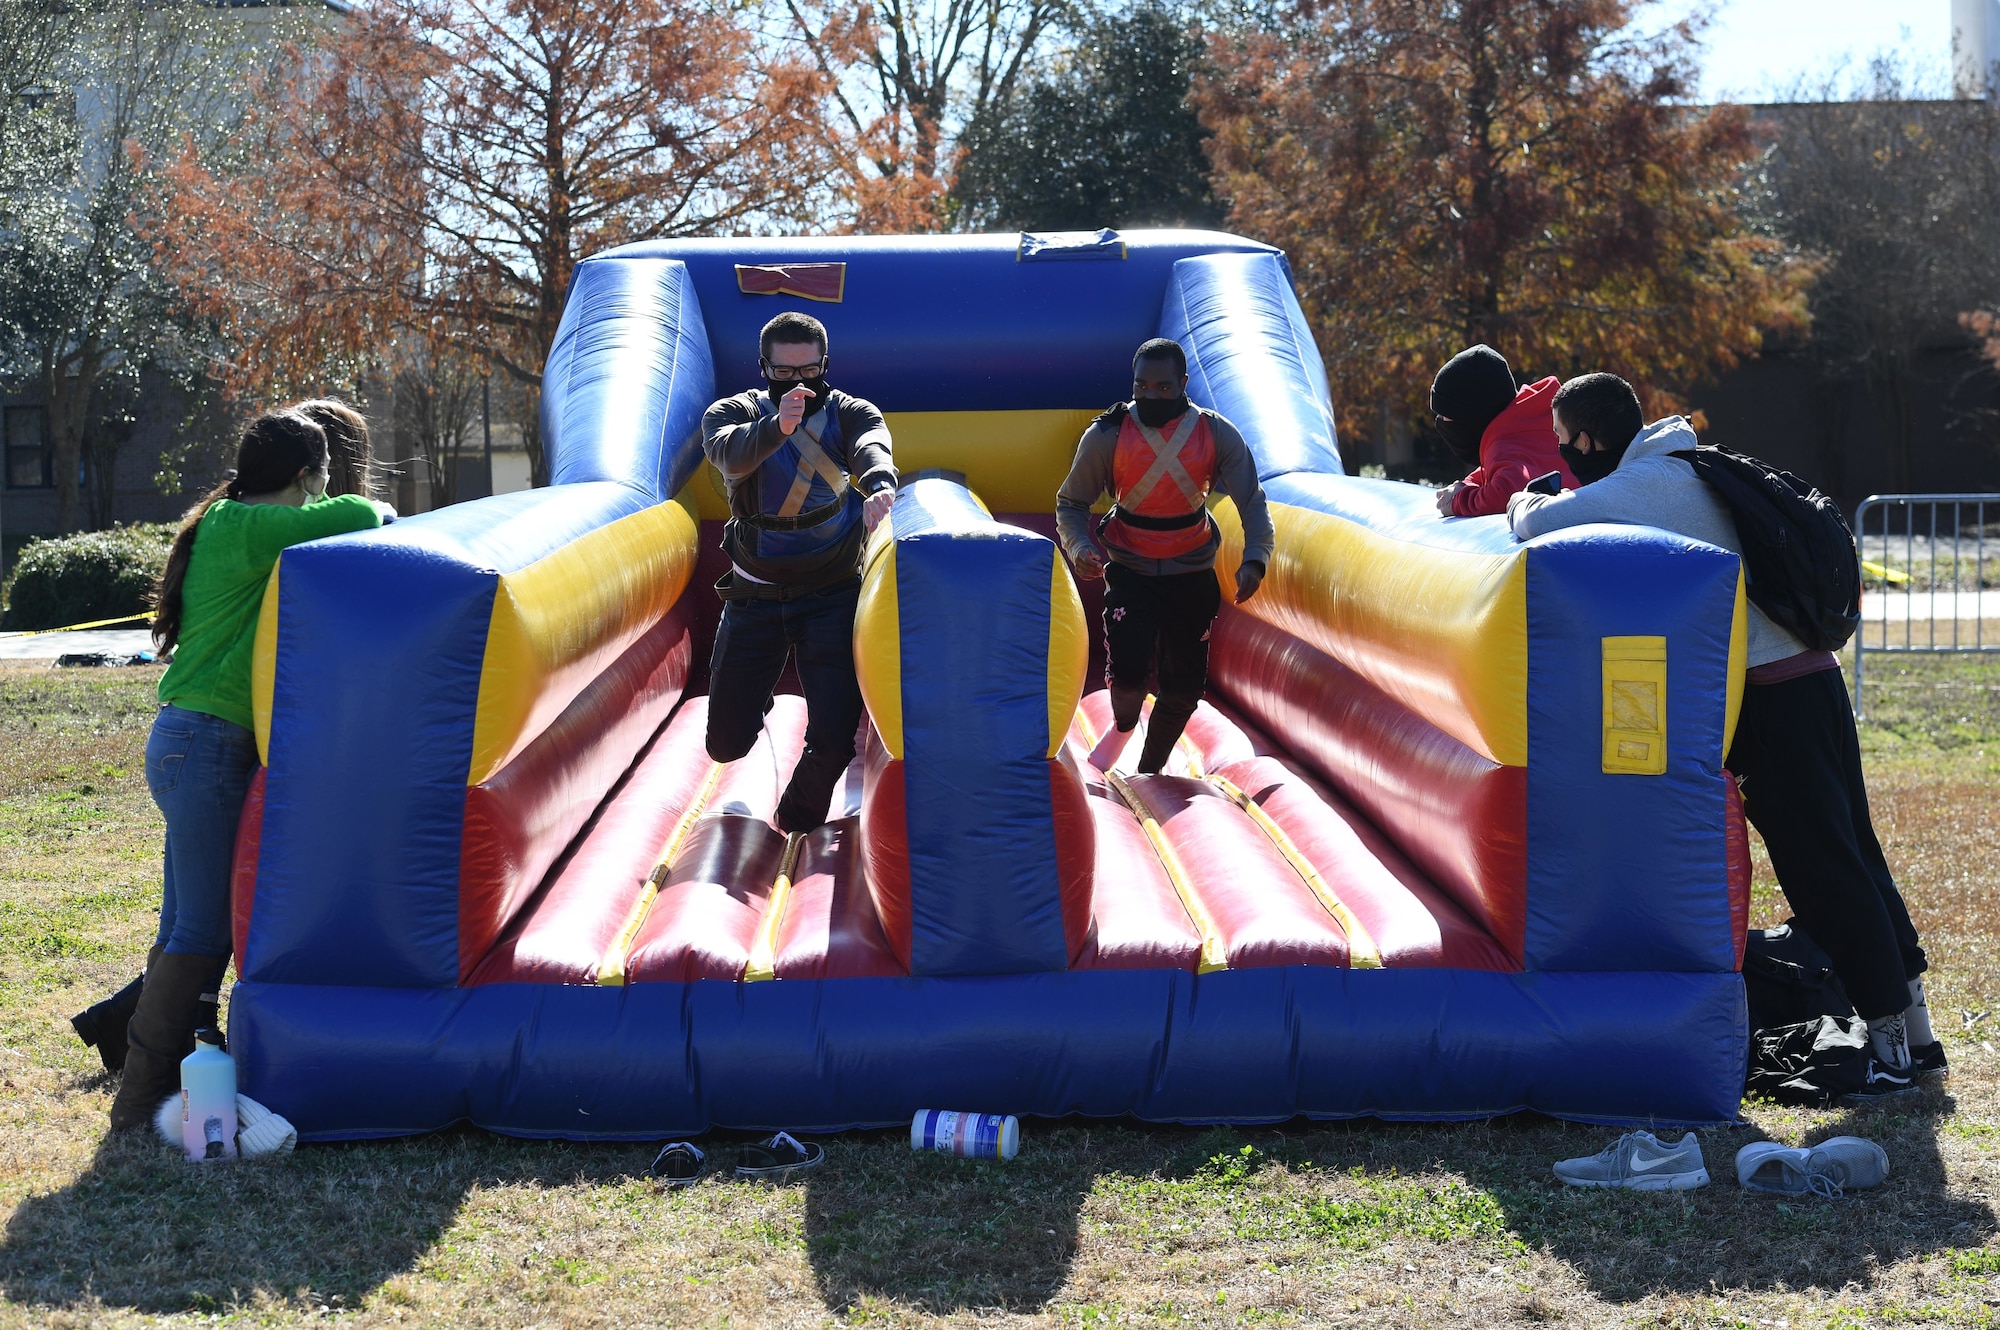 U.S. Air Force Airman 1st Class Tavis Pascual and Airman Joseph Delijah, 336th Training Squadron, participate in an inflatable race at Keesler Air Force Base, Mississippi, Dec. 18, 2020. The 81st Training Group held various events for Airmen to participate in throughout the holidays, to include ice skating, inflatables, a scavenger hunt and a bubble ball soccer tournament. (U.S. Air Force photo by Kemberly Groue)